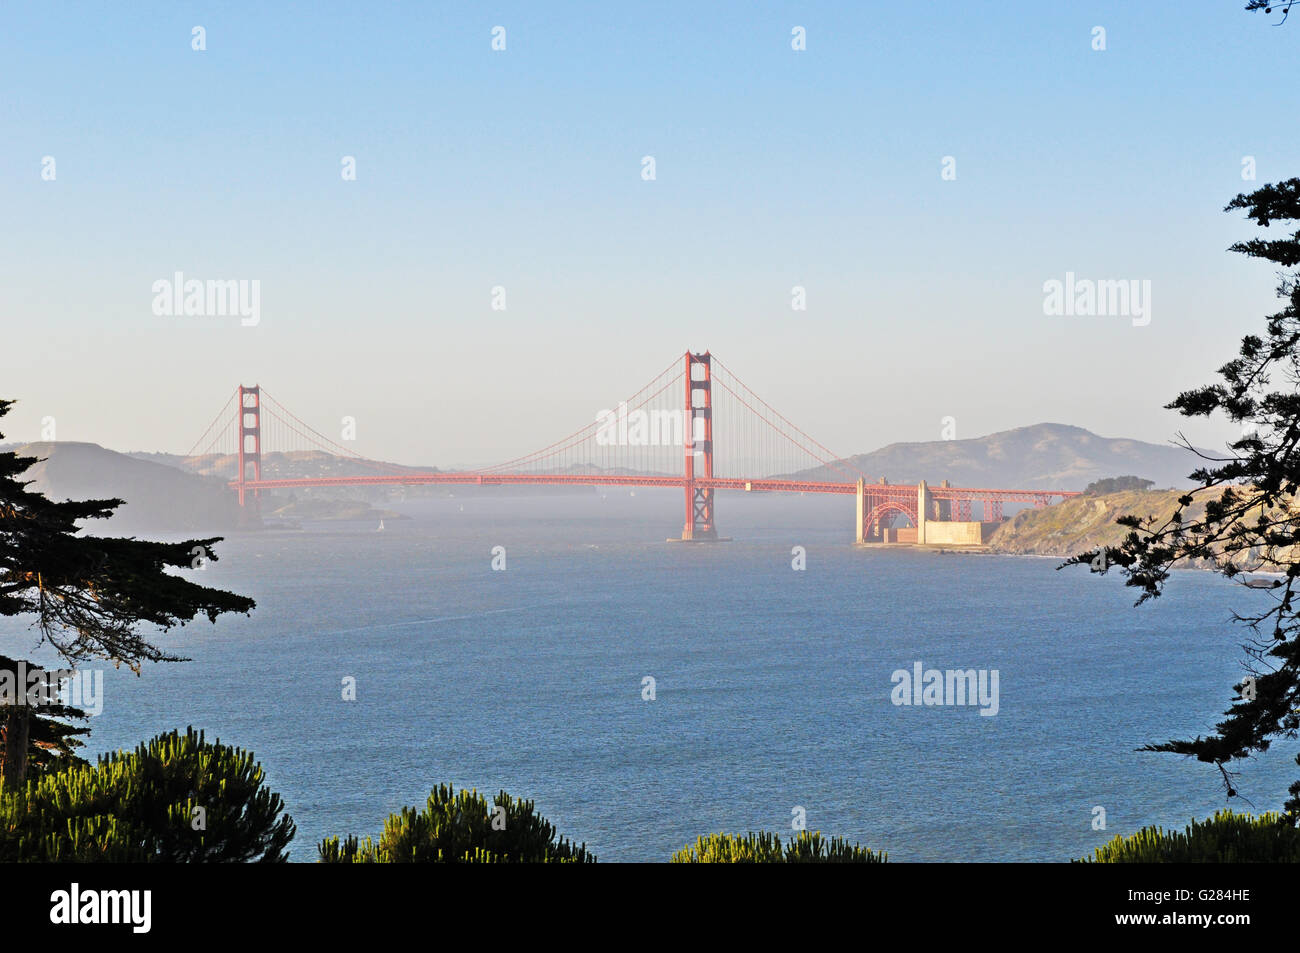 San Francisco: panoramic view of Golden Gate Bridge, opened in 1936, the symbol of the city of San Francisco in the world Stock Photo